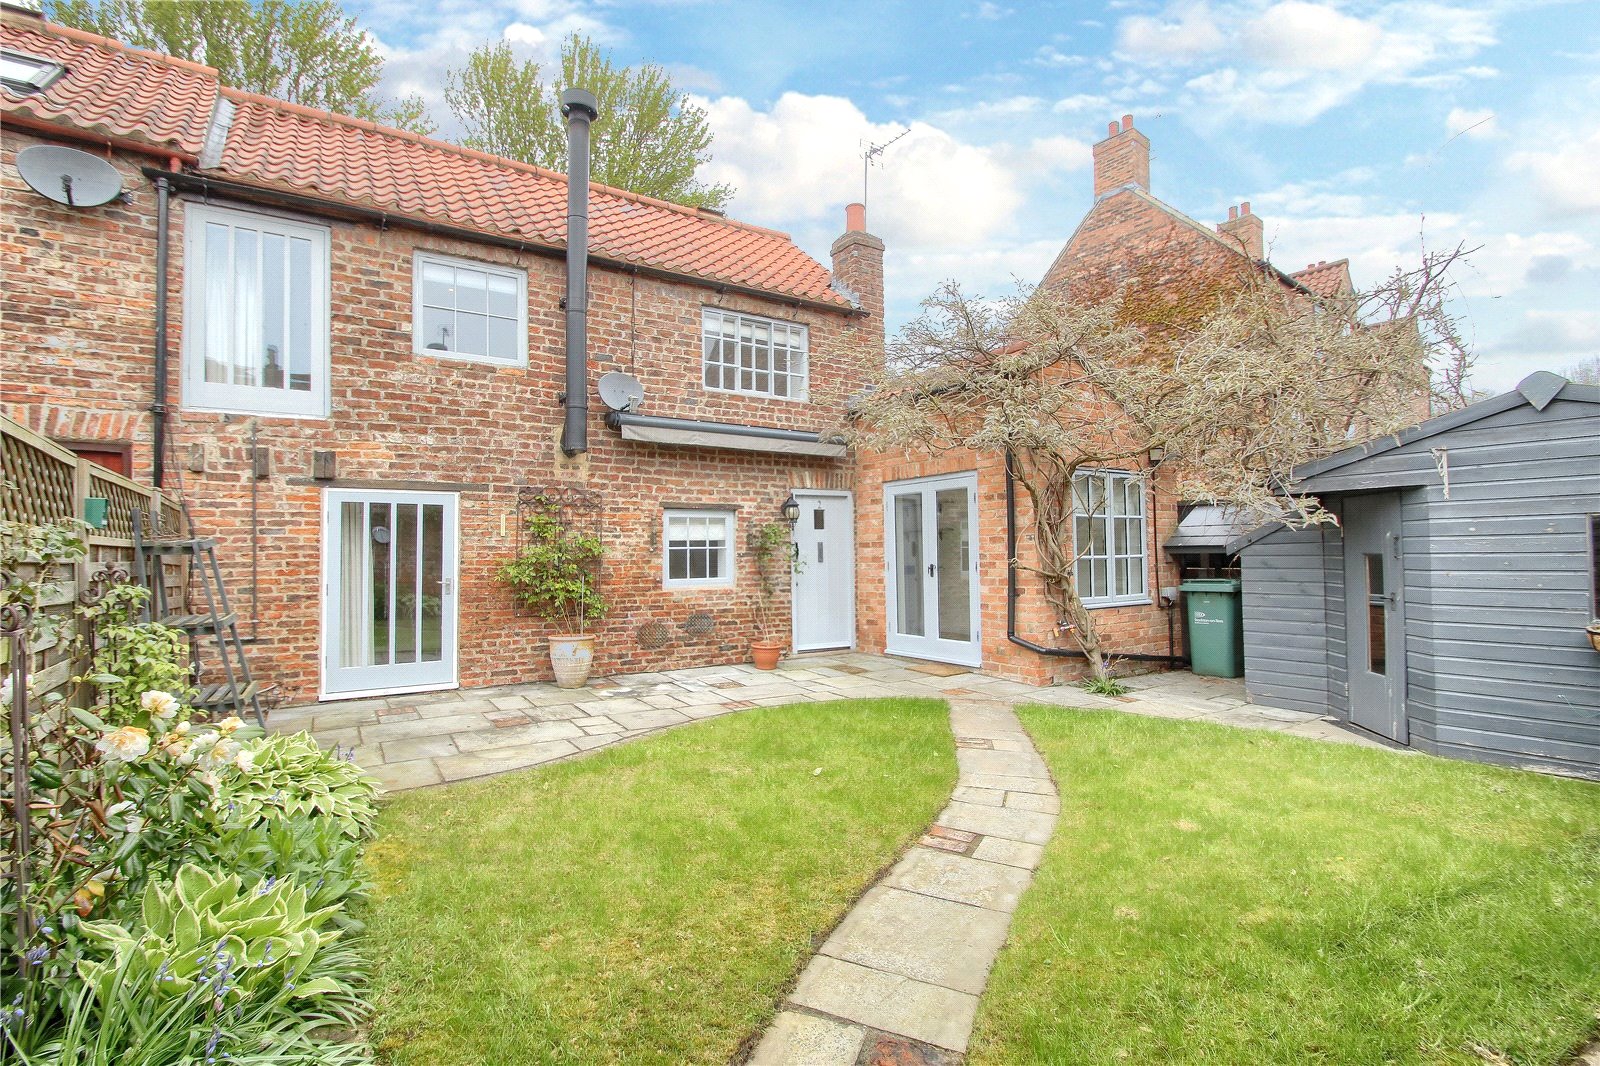 2 bed house for sale in Tom Browns Wynd, Yarm 1